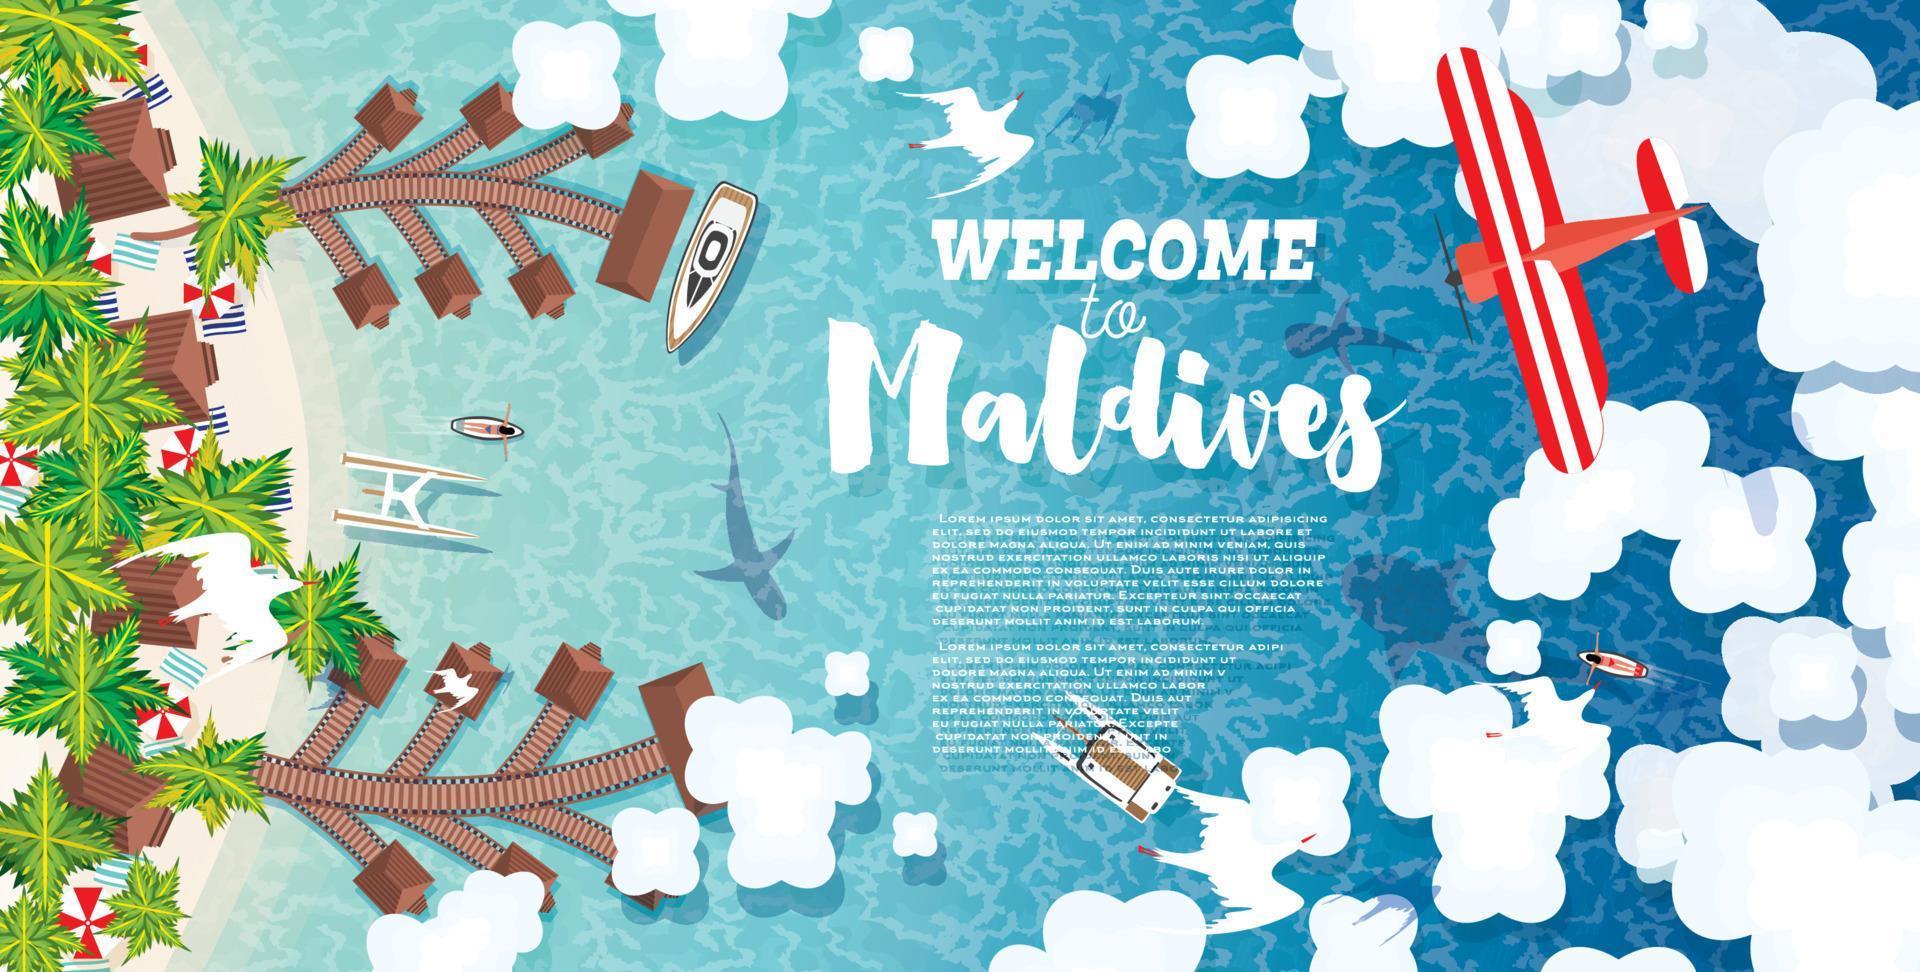 Maldives Beach on Island. Summer Background with Tropical Beach, Palms, Hotel, Clouds and Airplane. vector